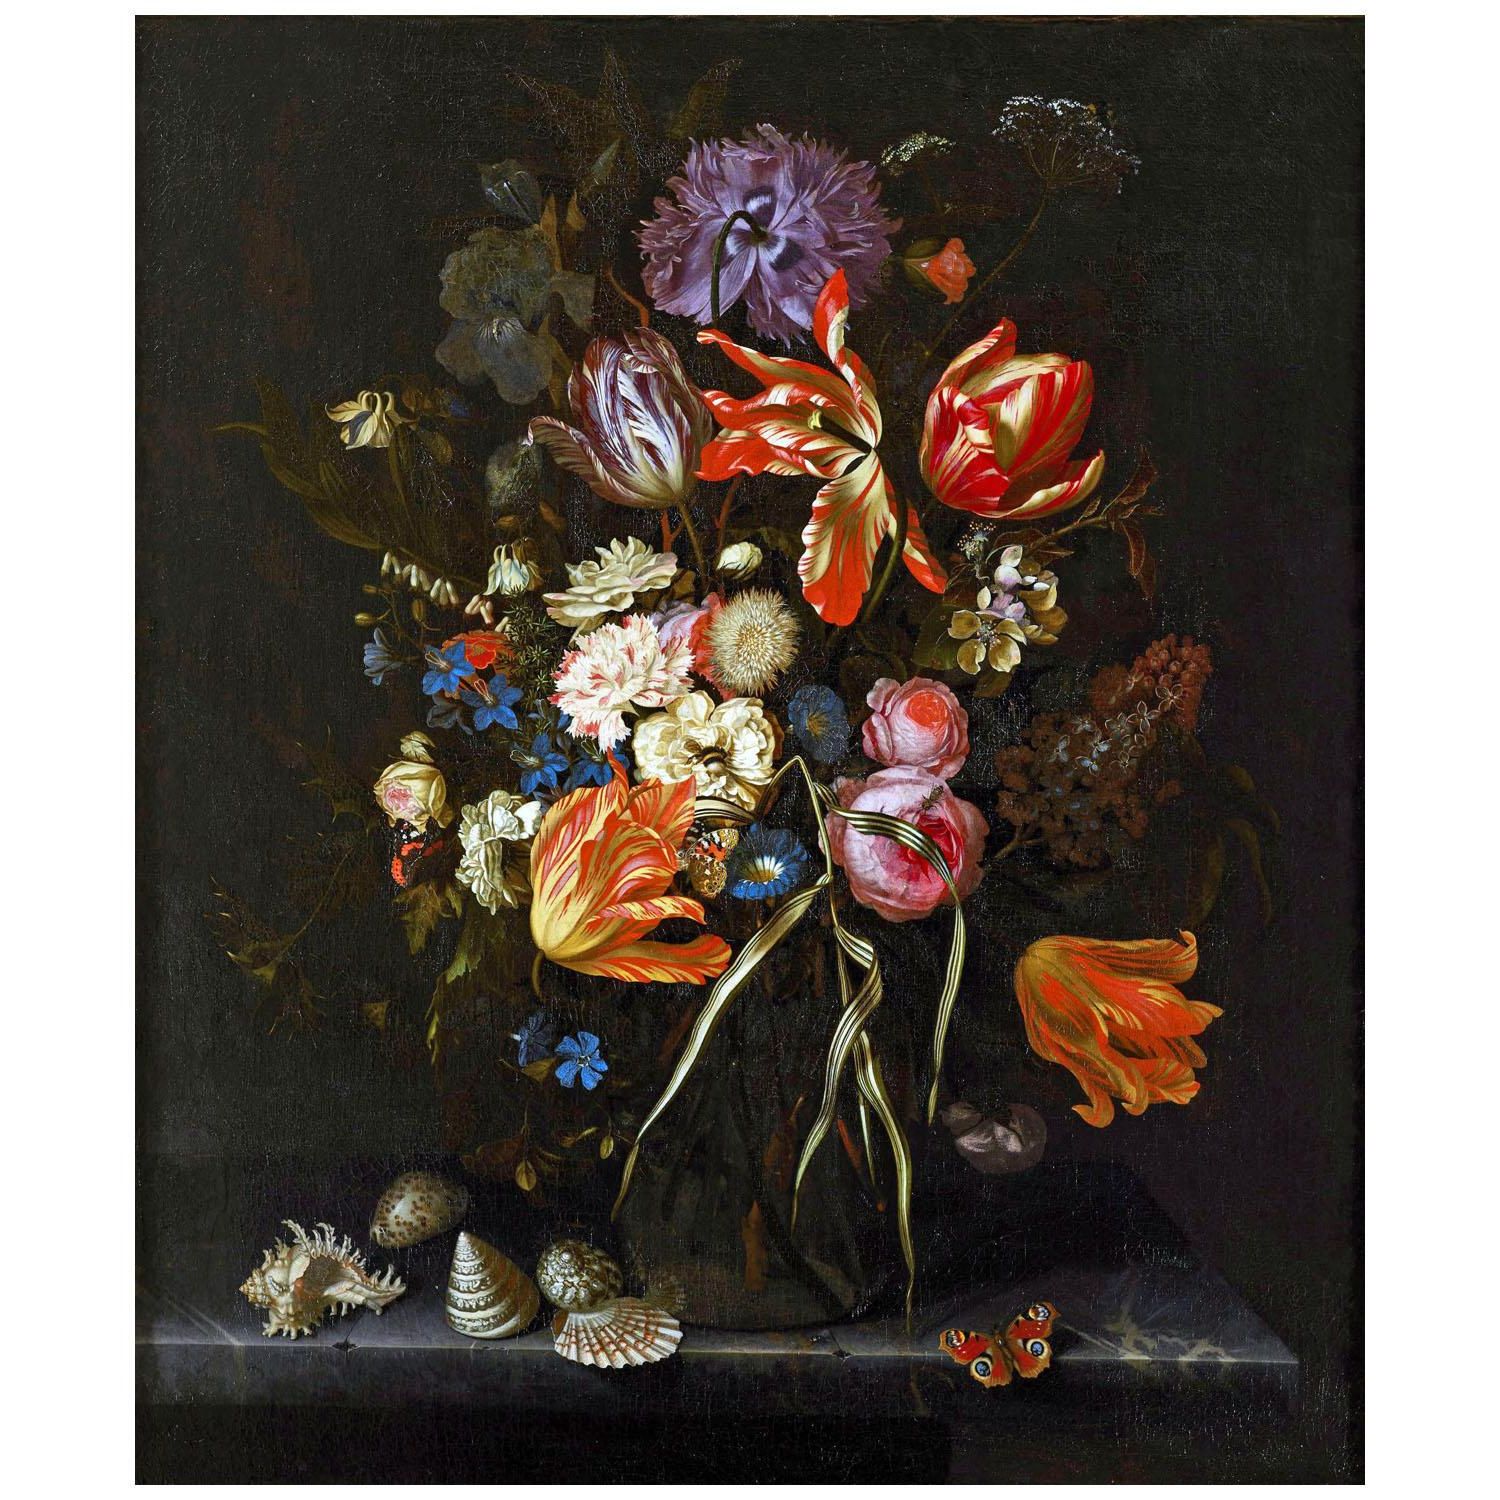 Maria van Oosterwijck. Still Life with Flowers. 1686. Royal collection London